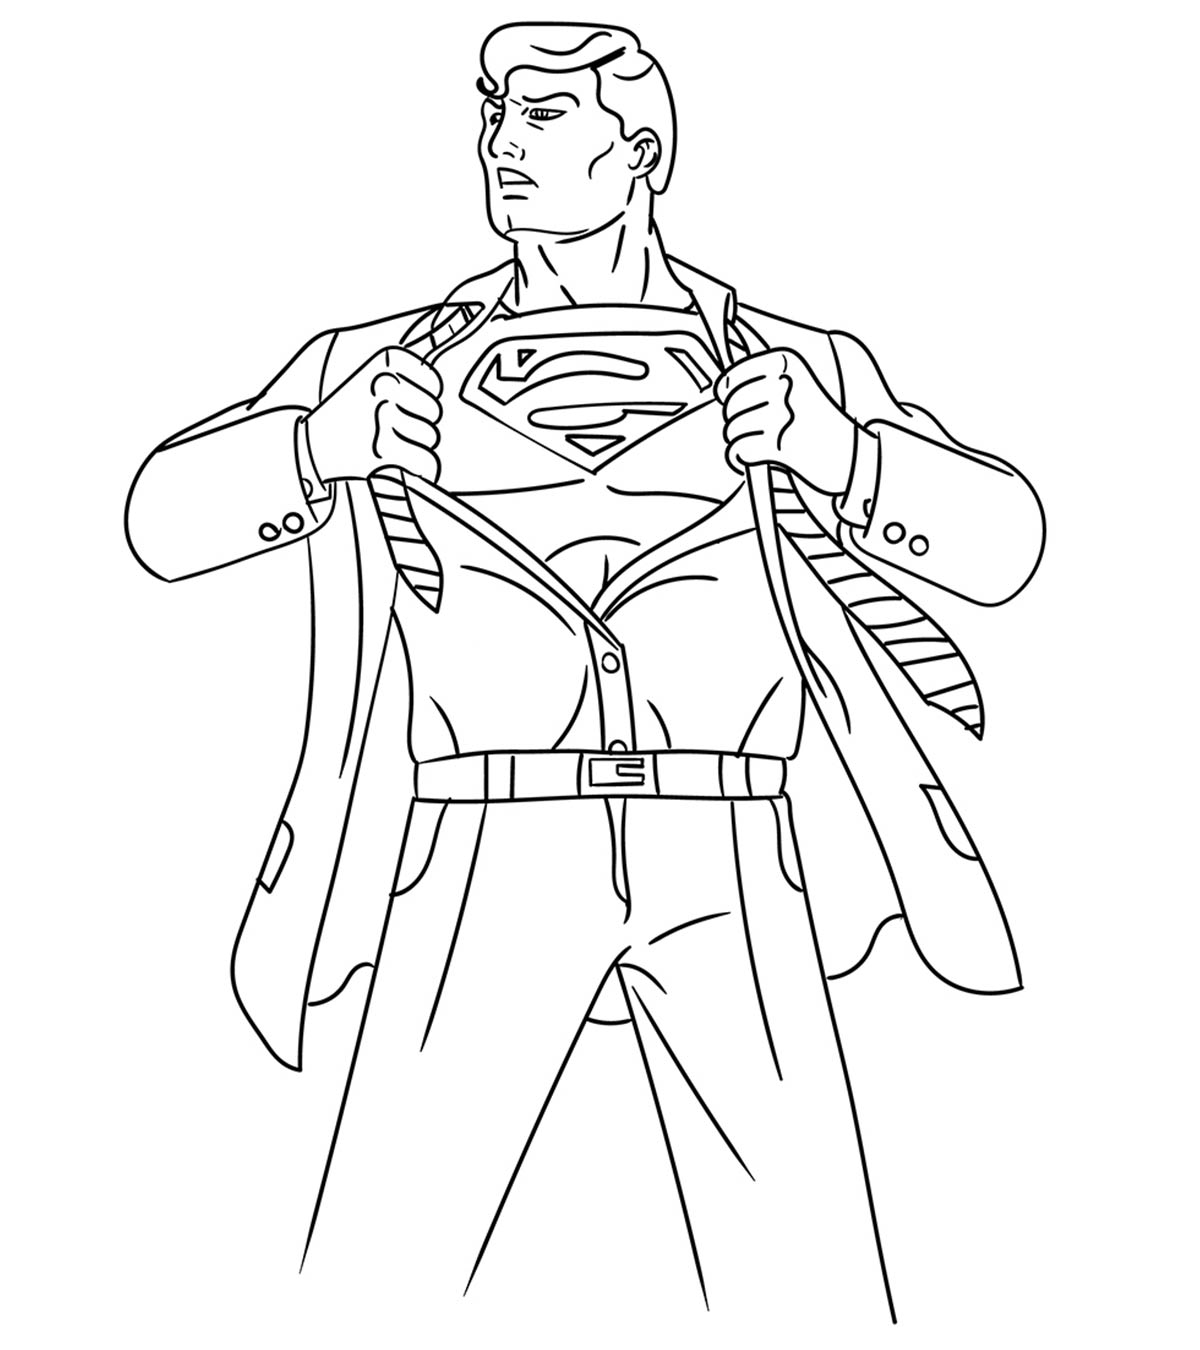 30 Simple Superman Coloring Pages Your Toddler Will Love_image